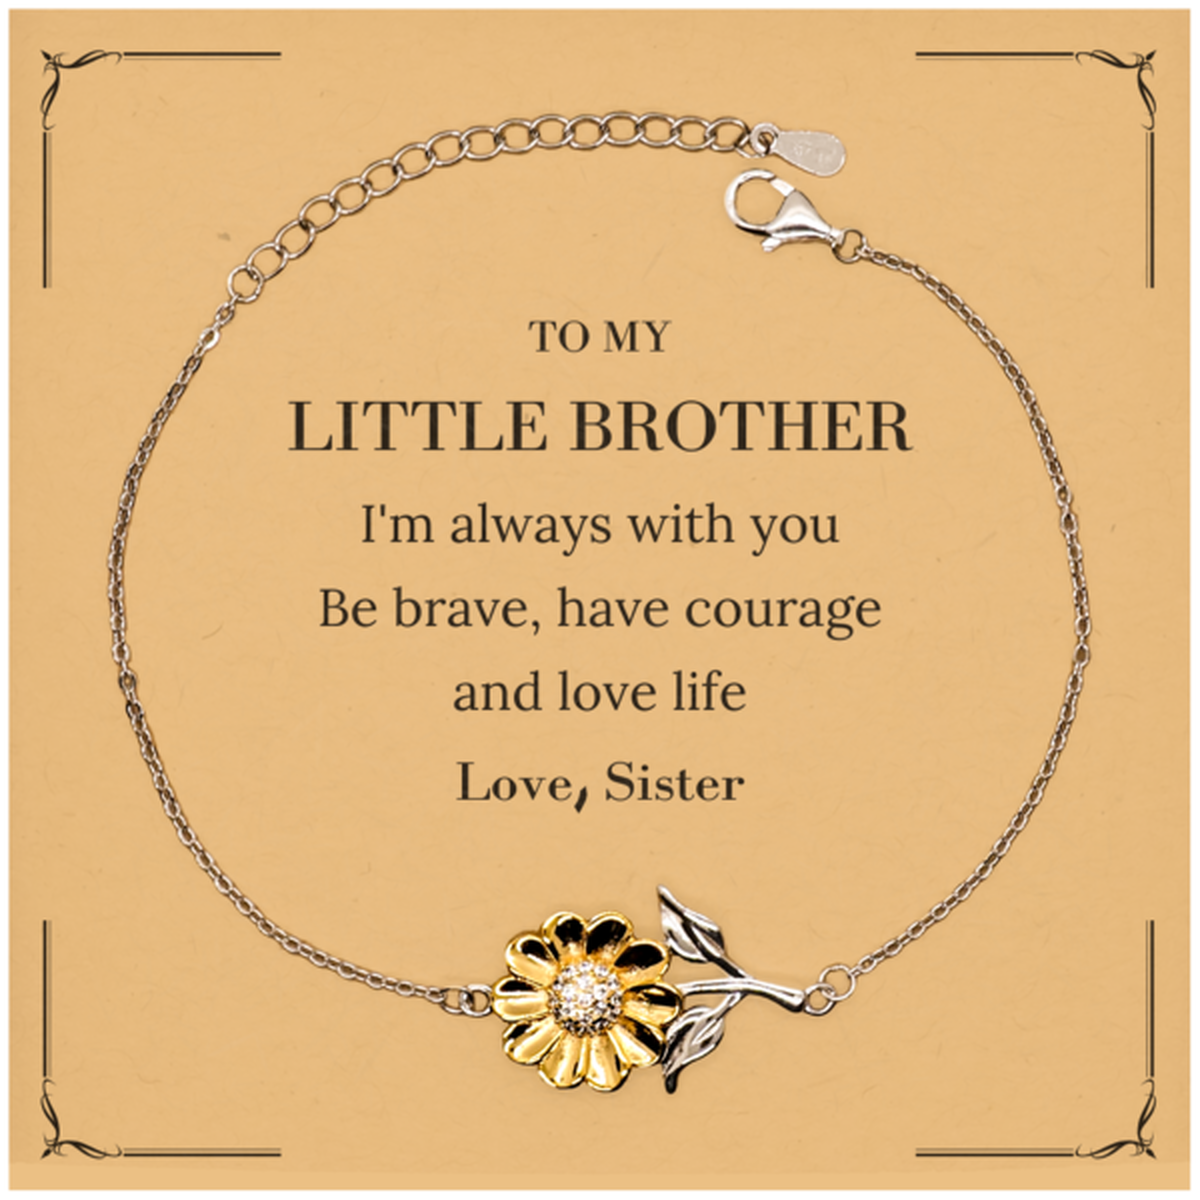 To My Little Brother Gifts from Sister, Unique Sunflower Bracelet Inspirational Christmas Birthday Graduation Gifts for Little Brother I'm always with you. Be brave, have courage and love life. Love, Sister